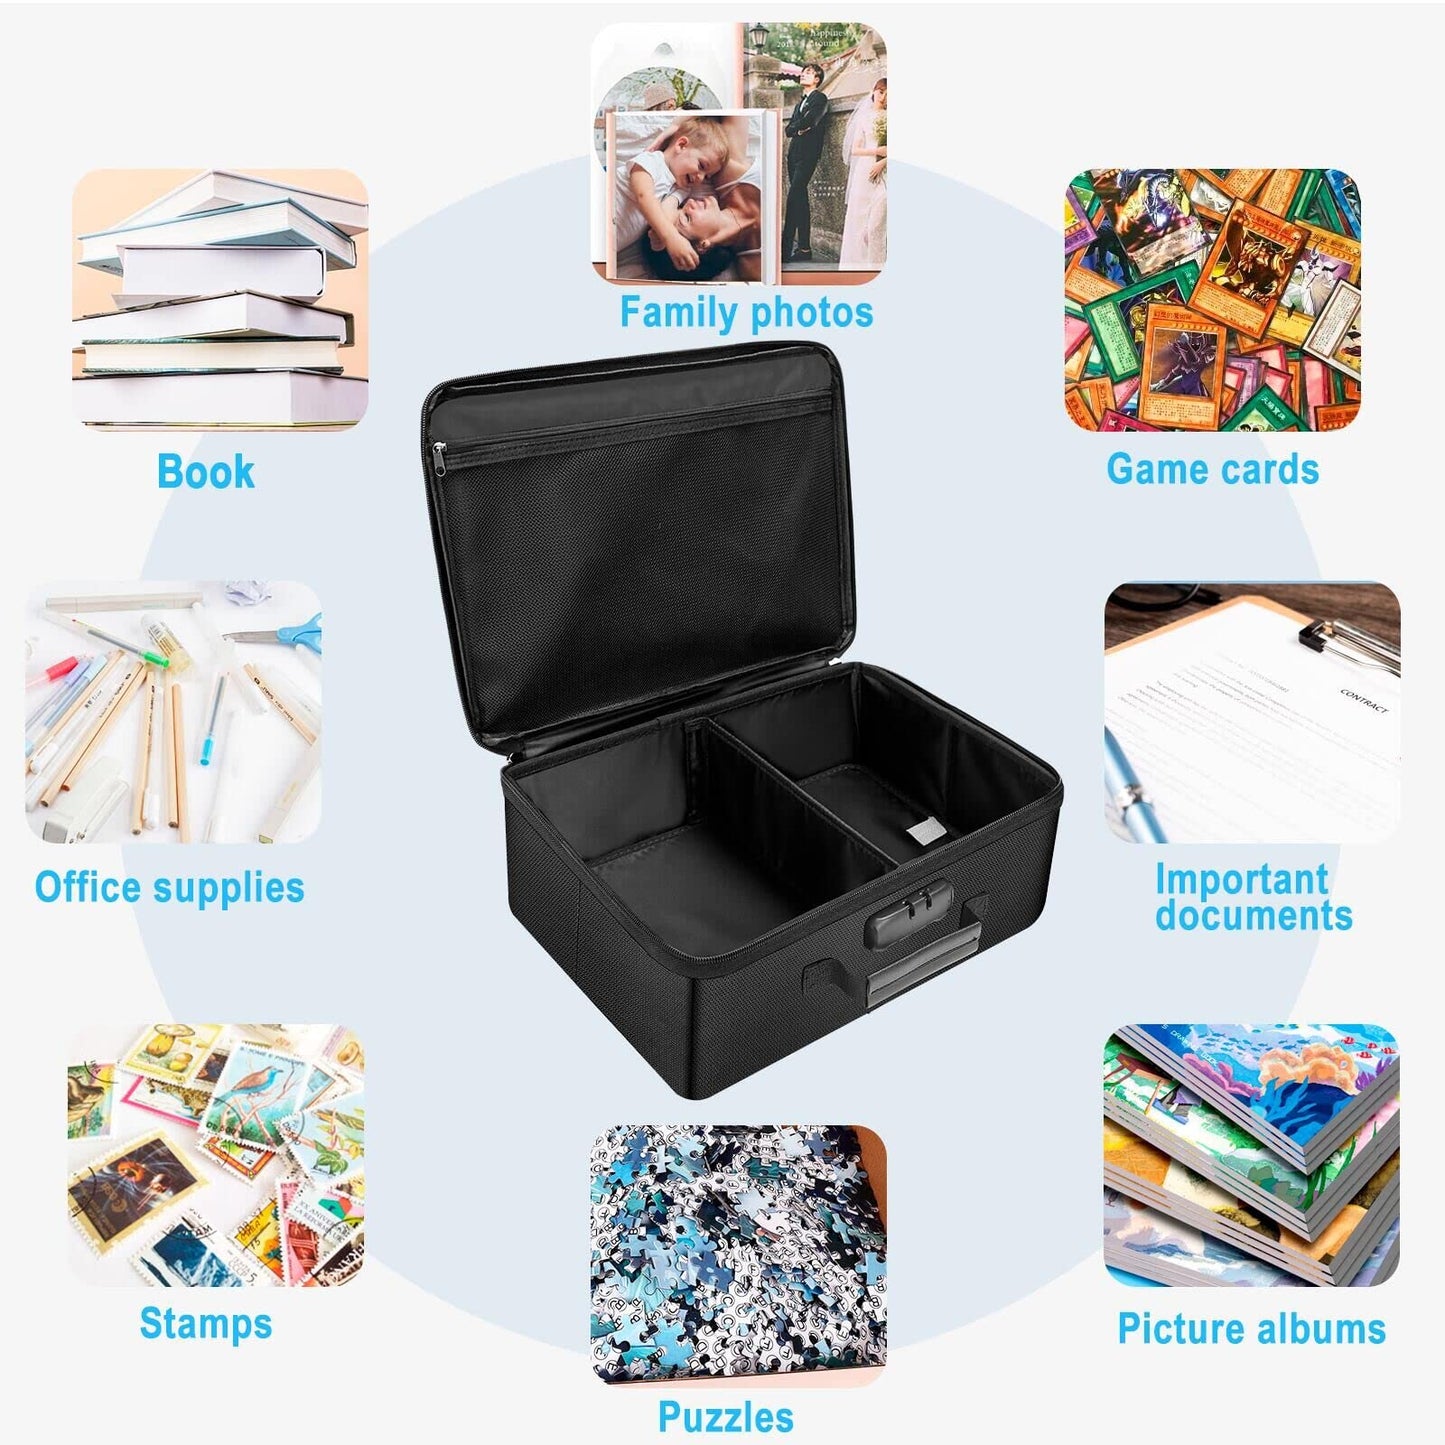 ENGPOW Fire Resistant Photo Storage Box with 16 Interior 4" x 6" Photo Boxes (Multi-Color), Lockable Photo Storage Box, Foldable Portable Photo Storage Container with Handles to Hold Photos , pictures, photography rafts